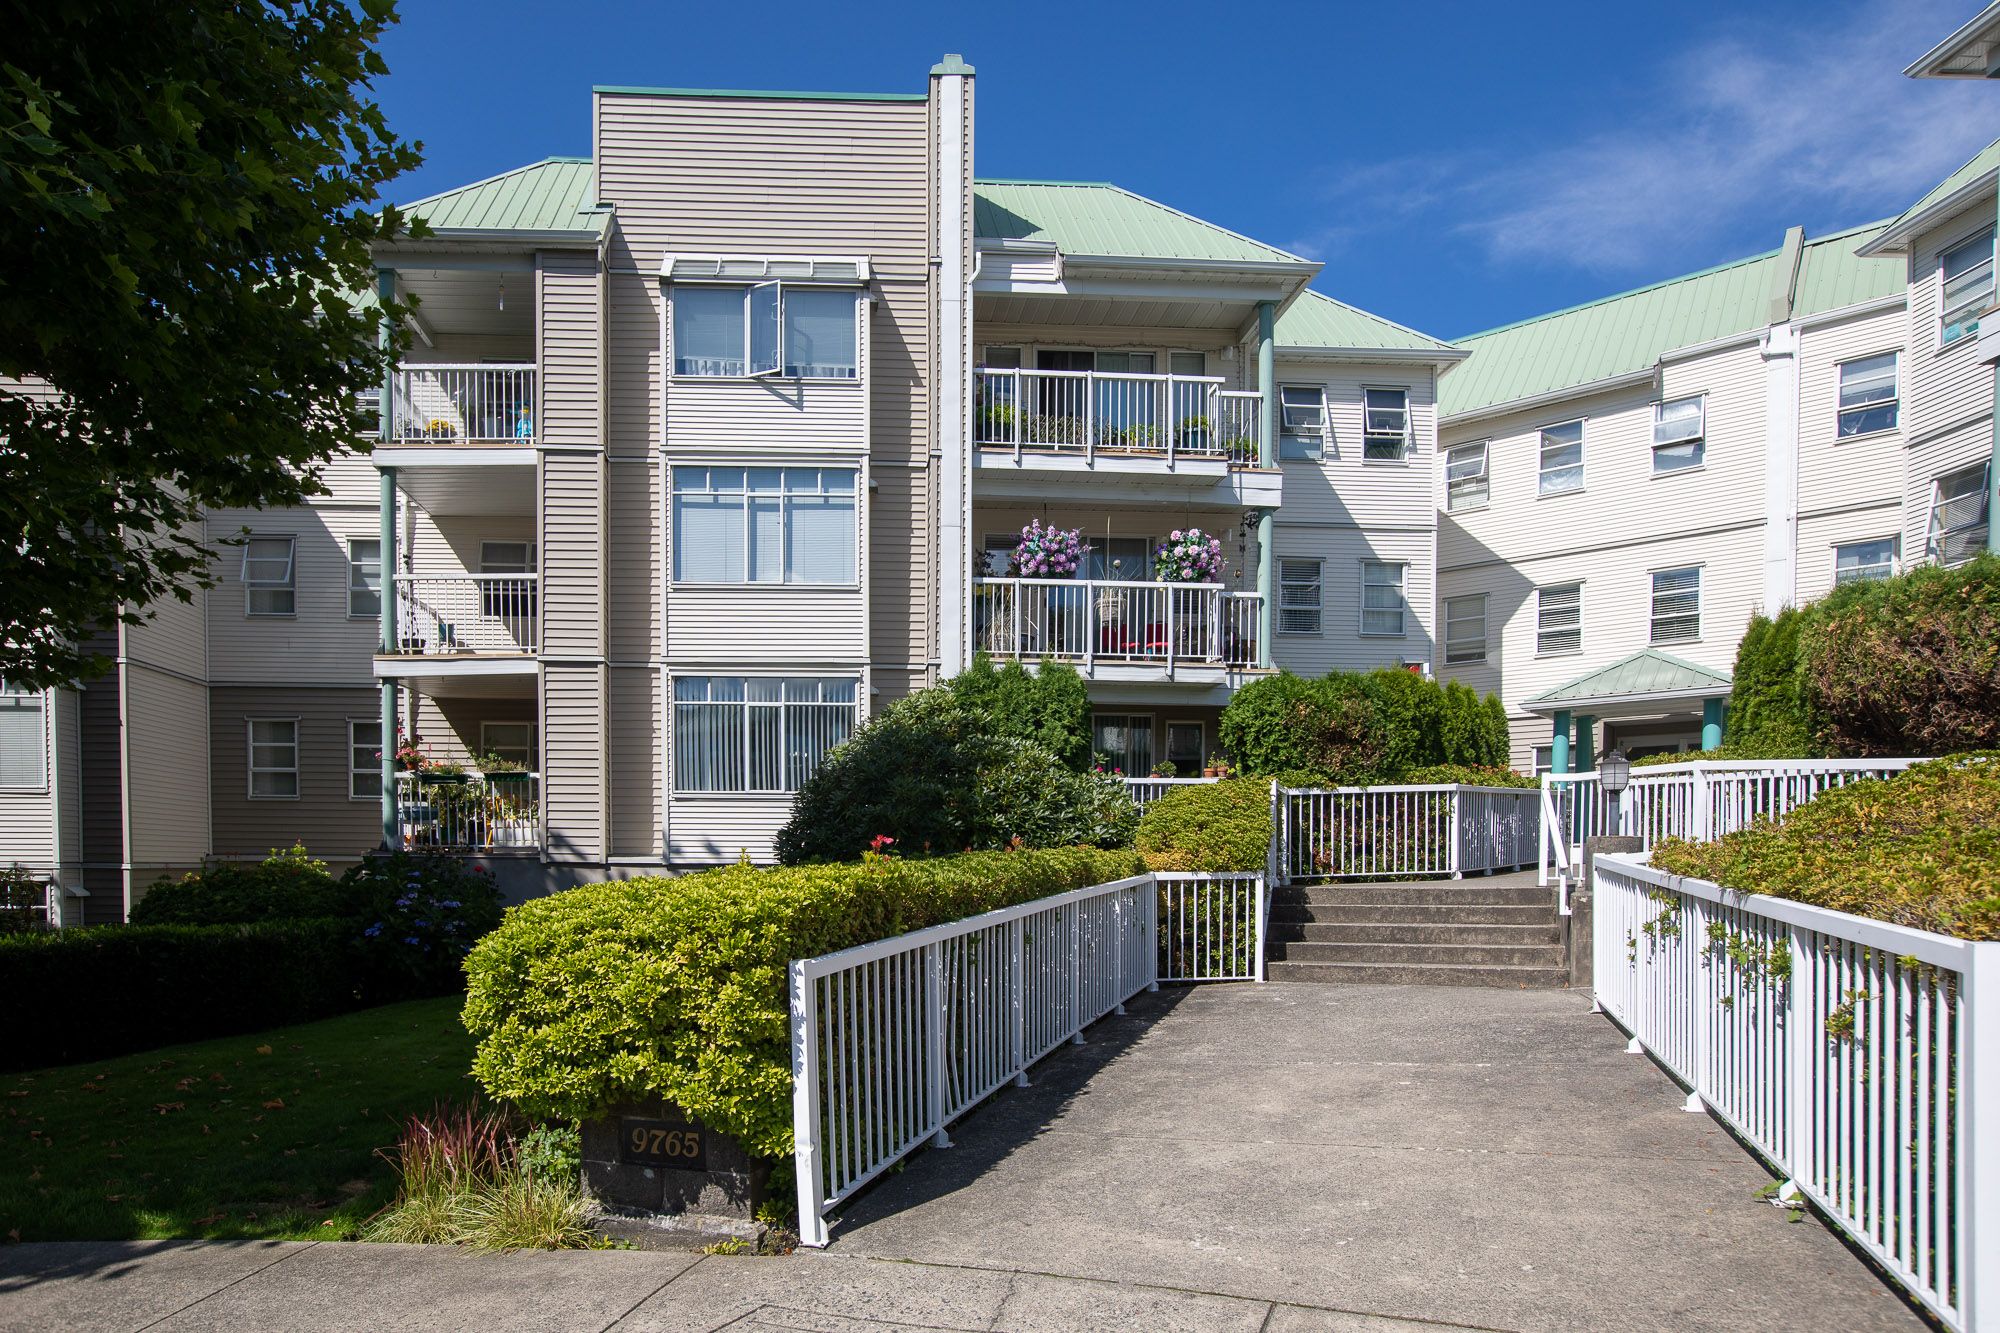 Main Photo: 216 9765 140 Street in : Whalley Condo for sale (Surrey)  : MLS®# R2488767